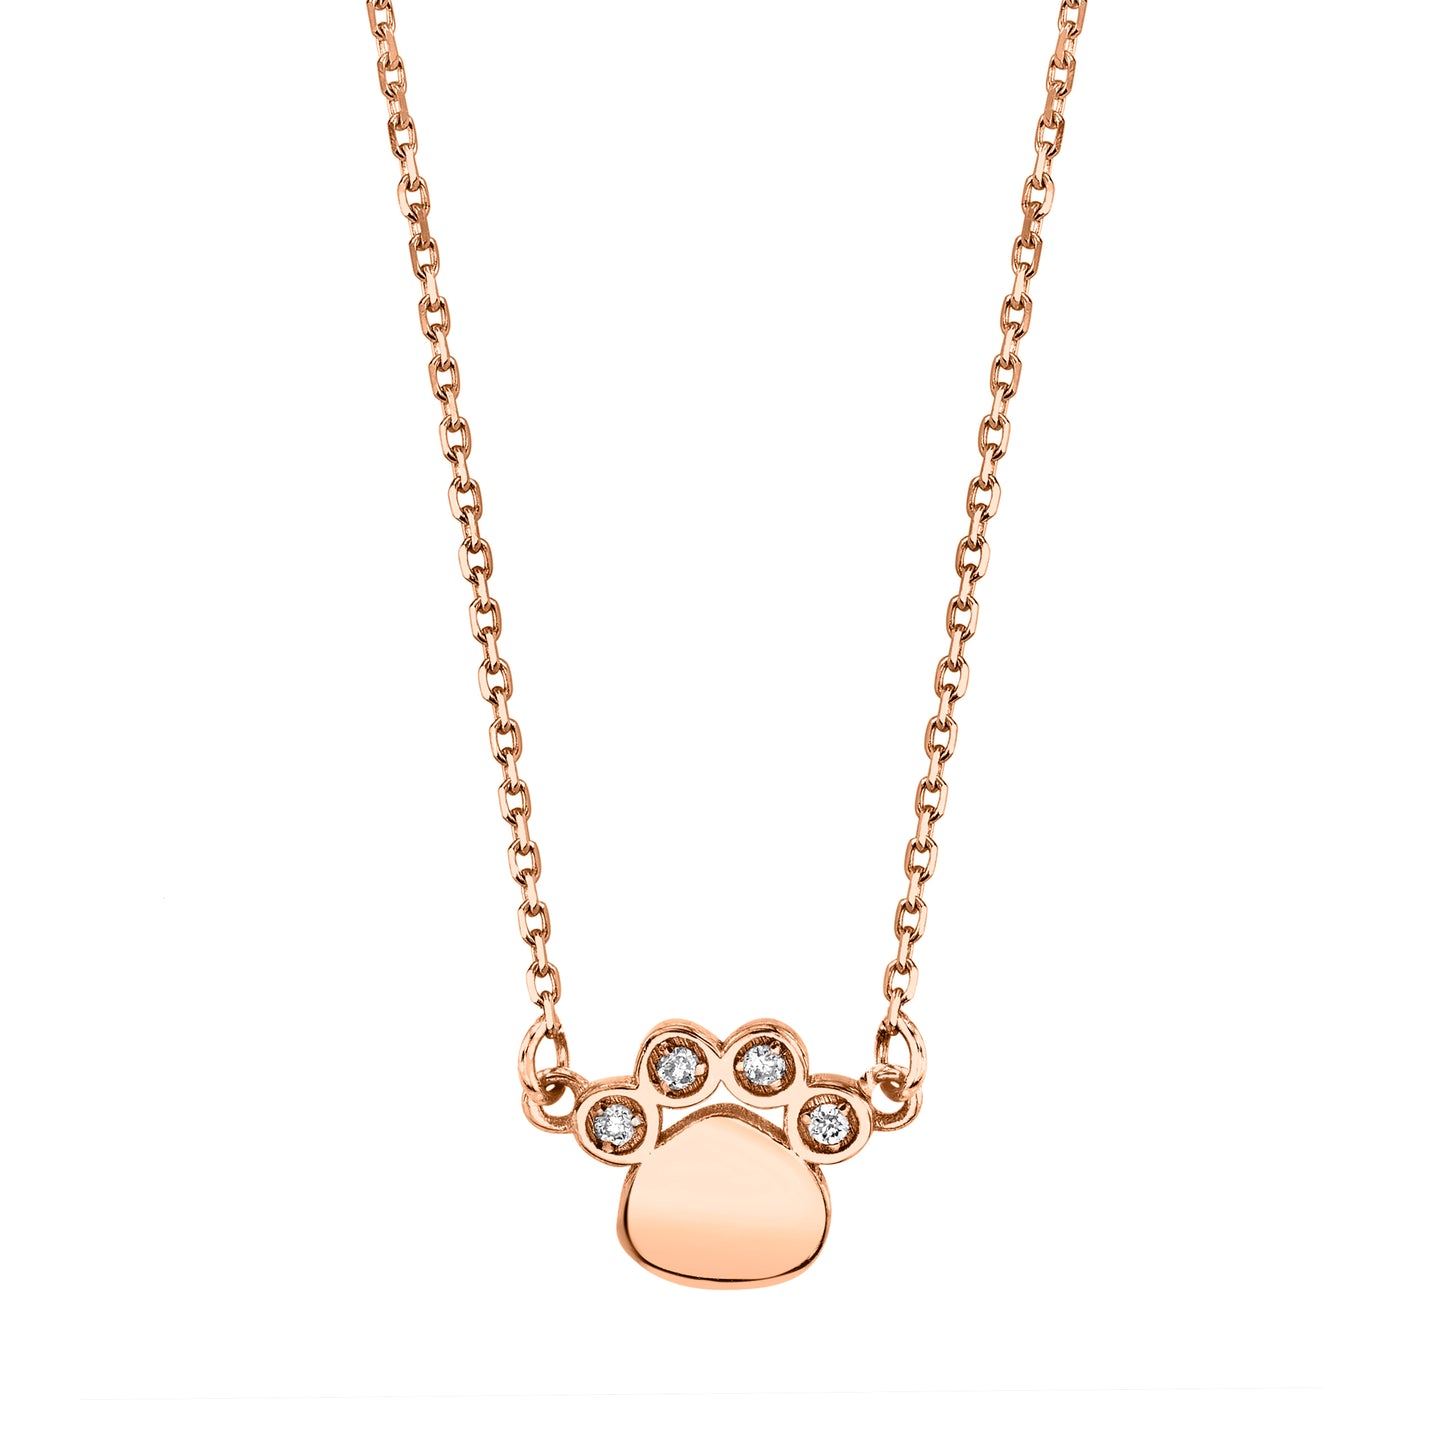 Petite Diamond Paw Necklace in 14K Gold